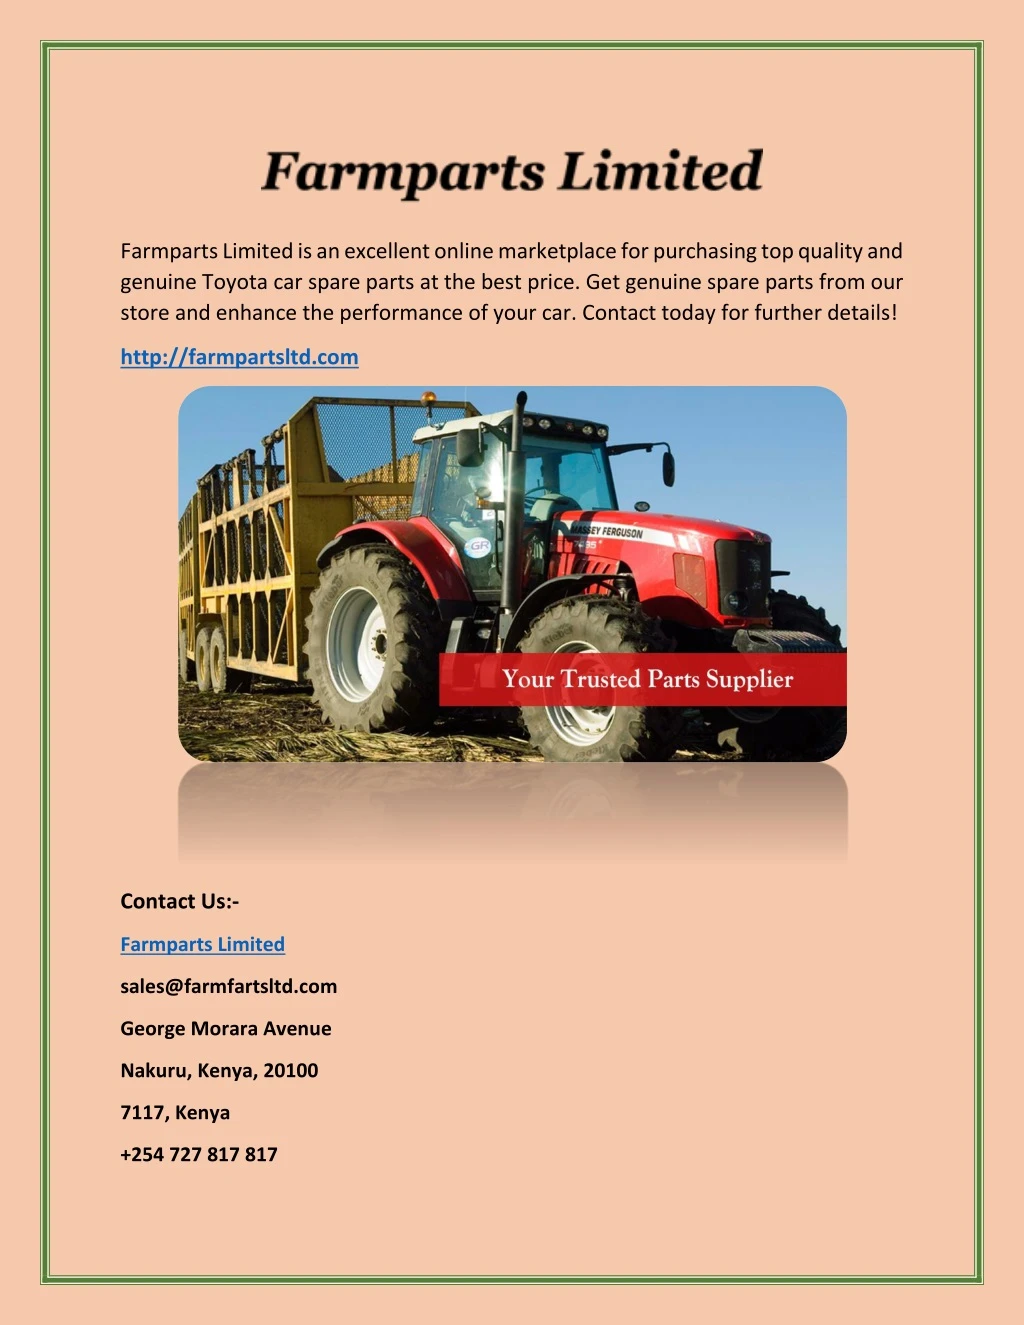 farmparts limited is an excellent online